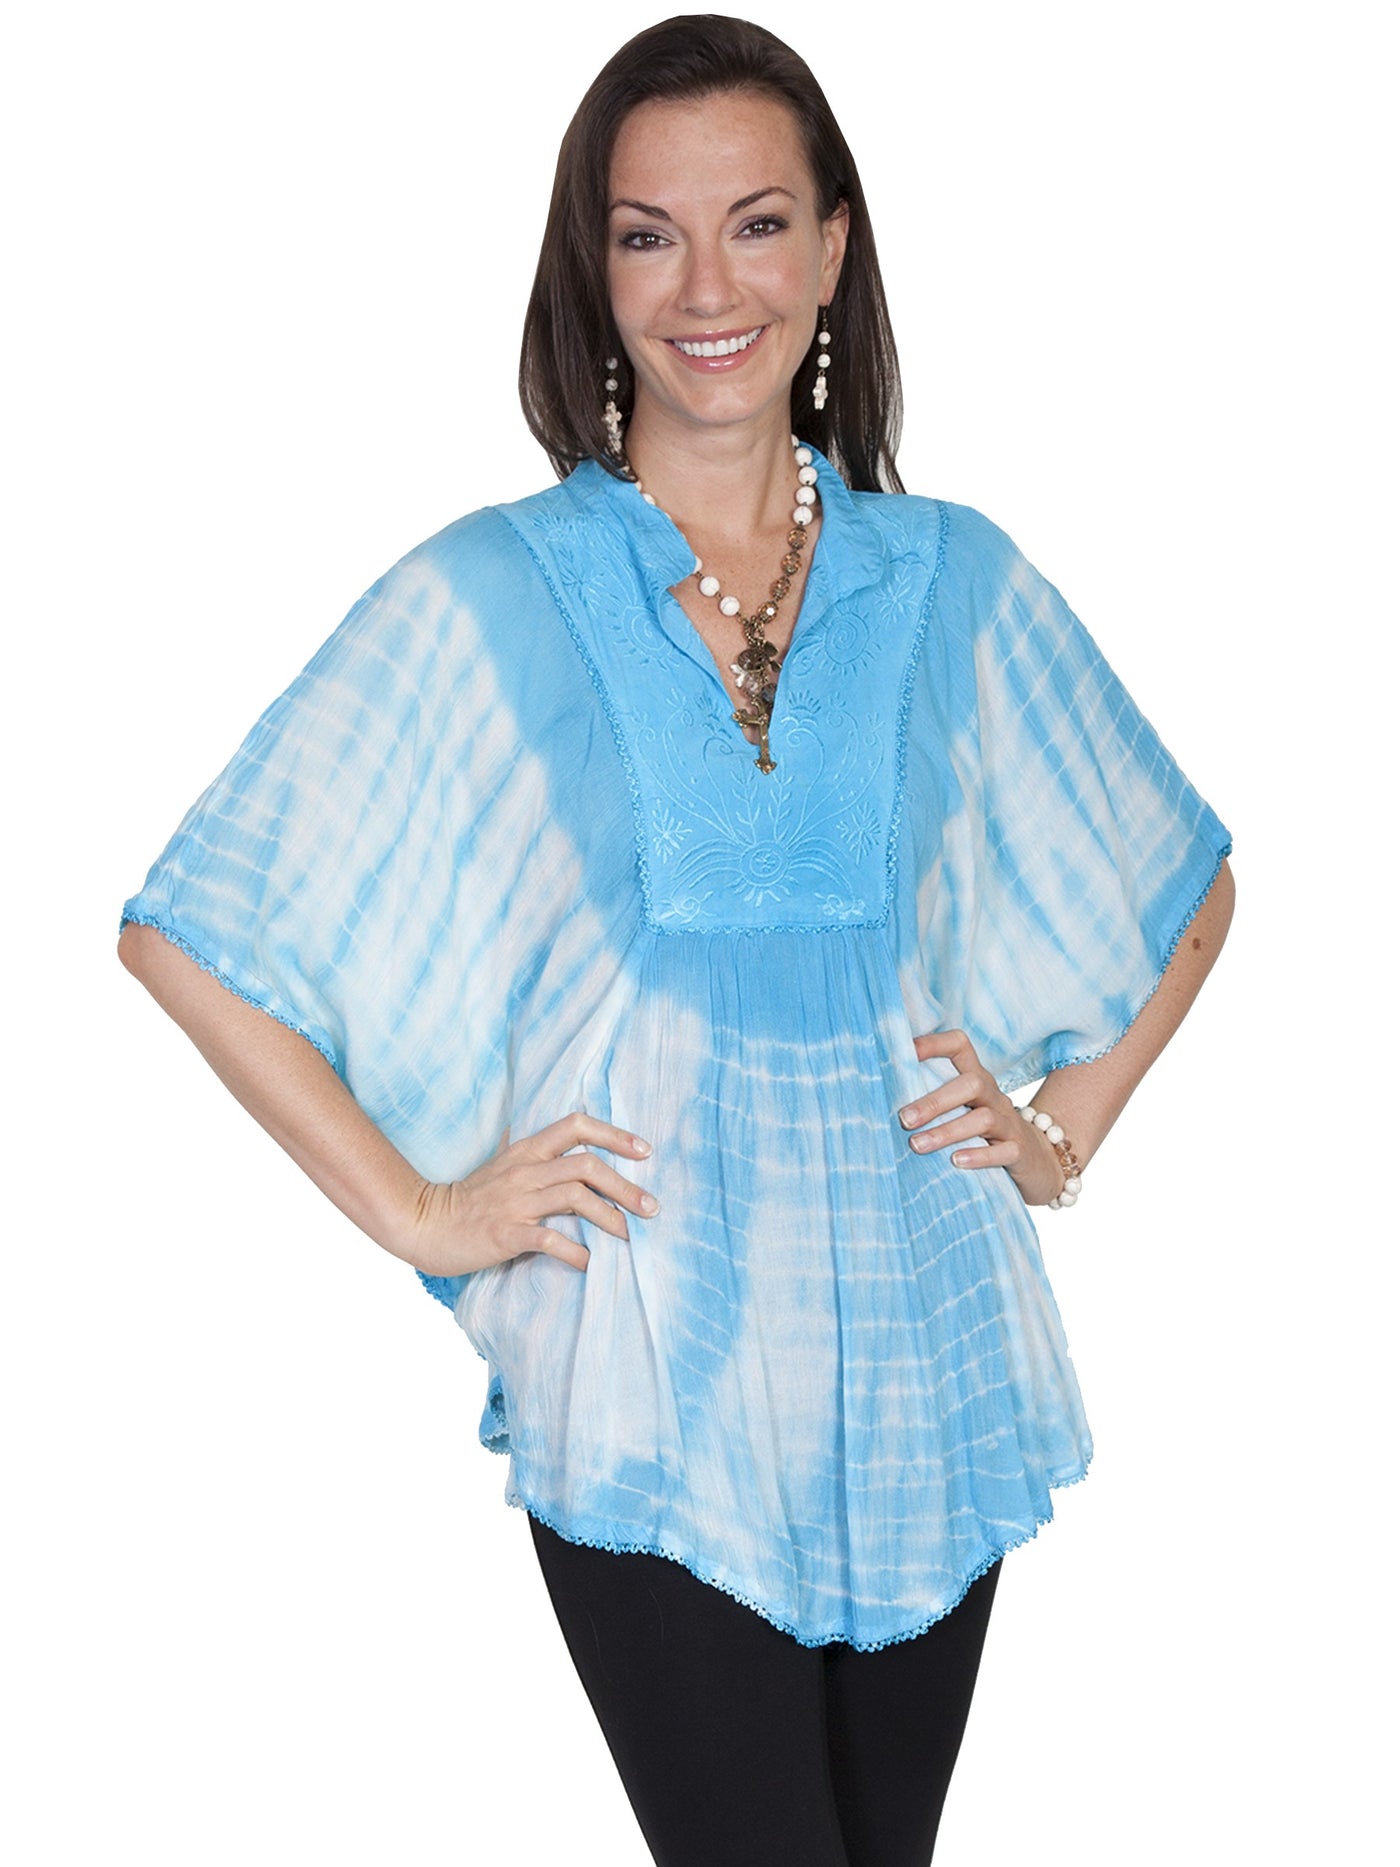 Bohemian Poncho Blouse in Turquoise - SOLD OUT